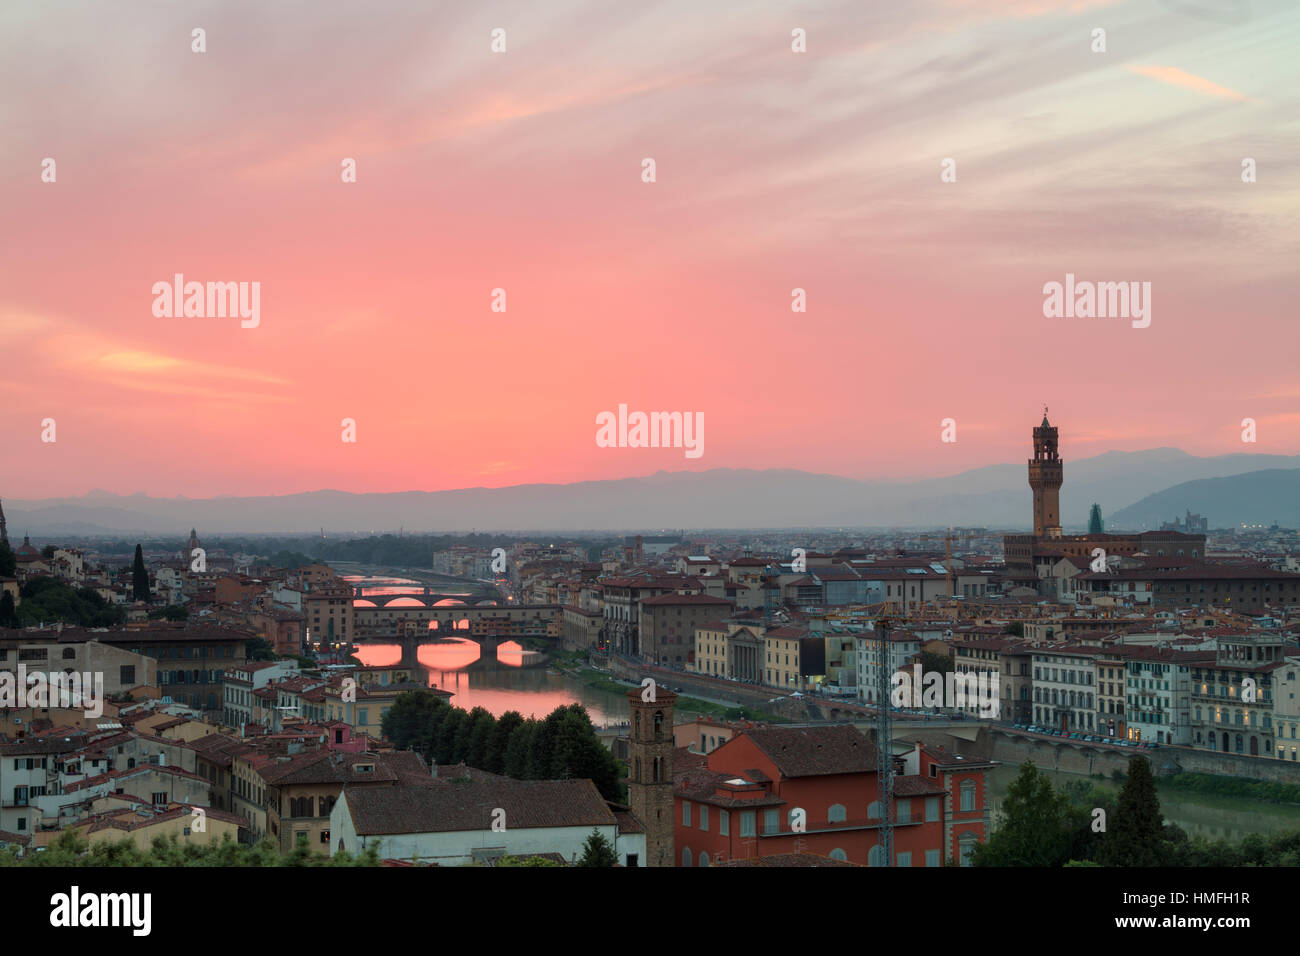 Arno River with Ponte Vecchio and Palazzo Vecchio at sunset seen from Piazzale Michelangelo, Florence, Tuscany, Italy Stock Photo